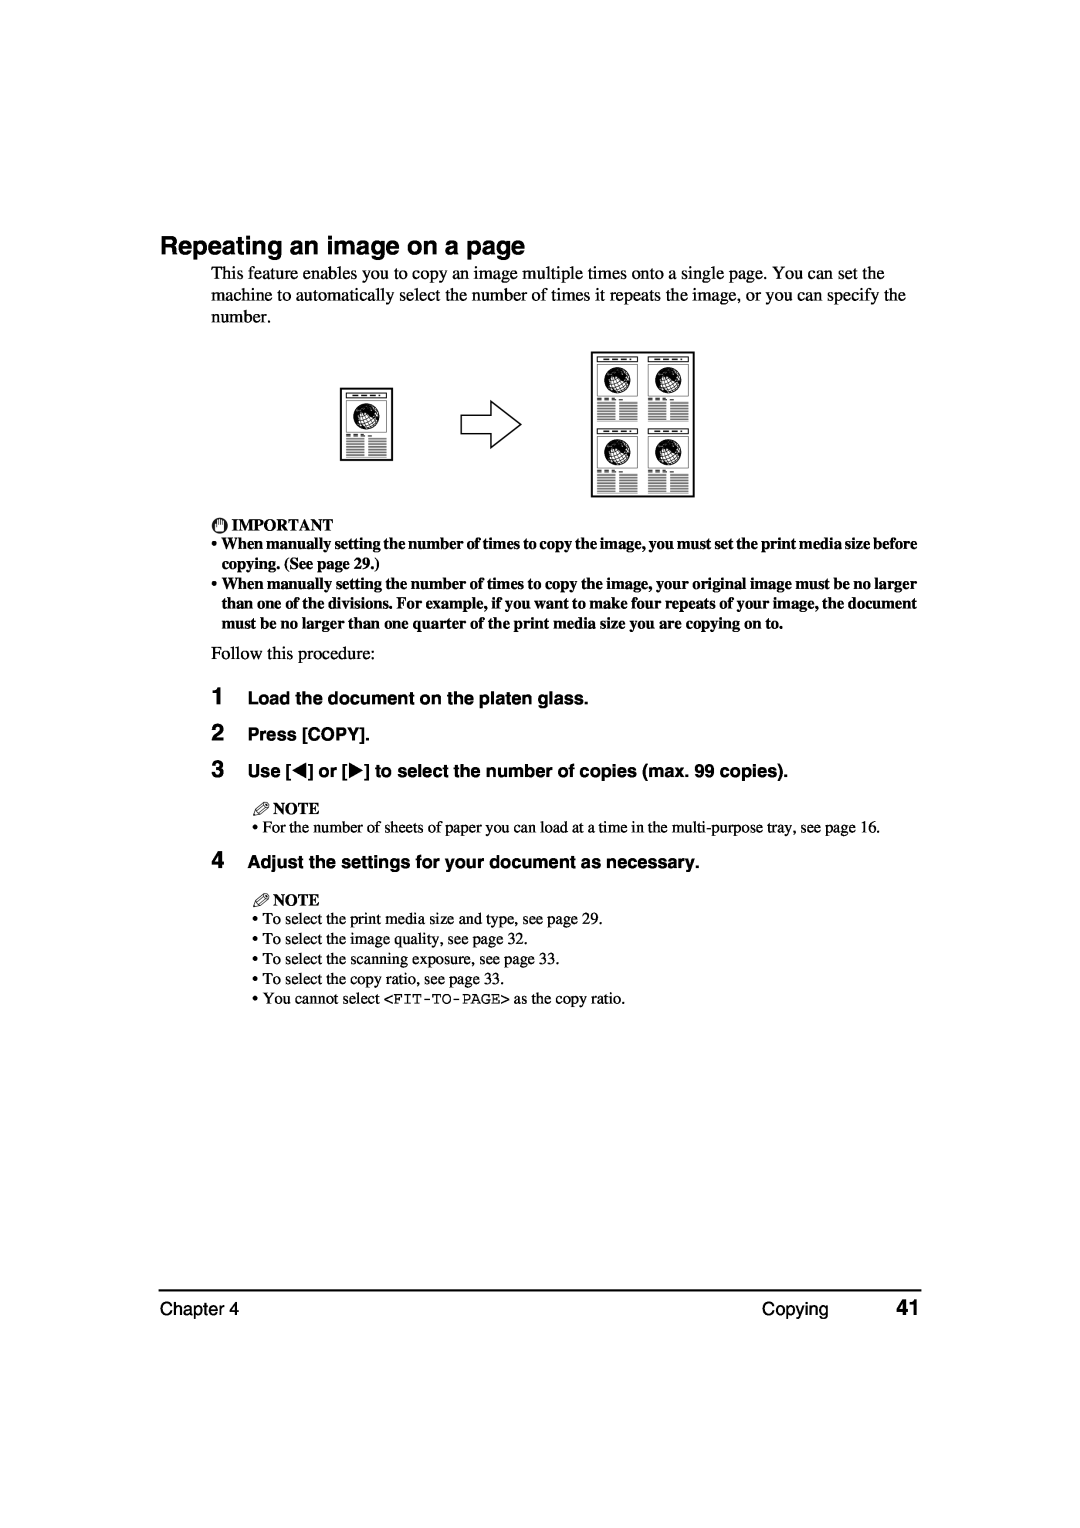 Canon MP370, MP360 manual Repeating an image on a page, Load the document on the platen glass Press COPY, Chapter, Copying 